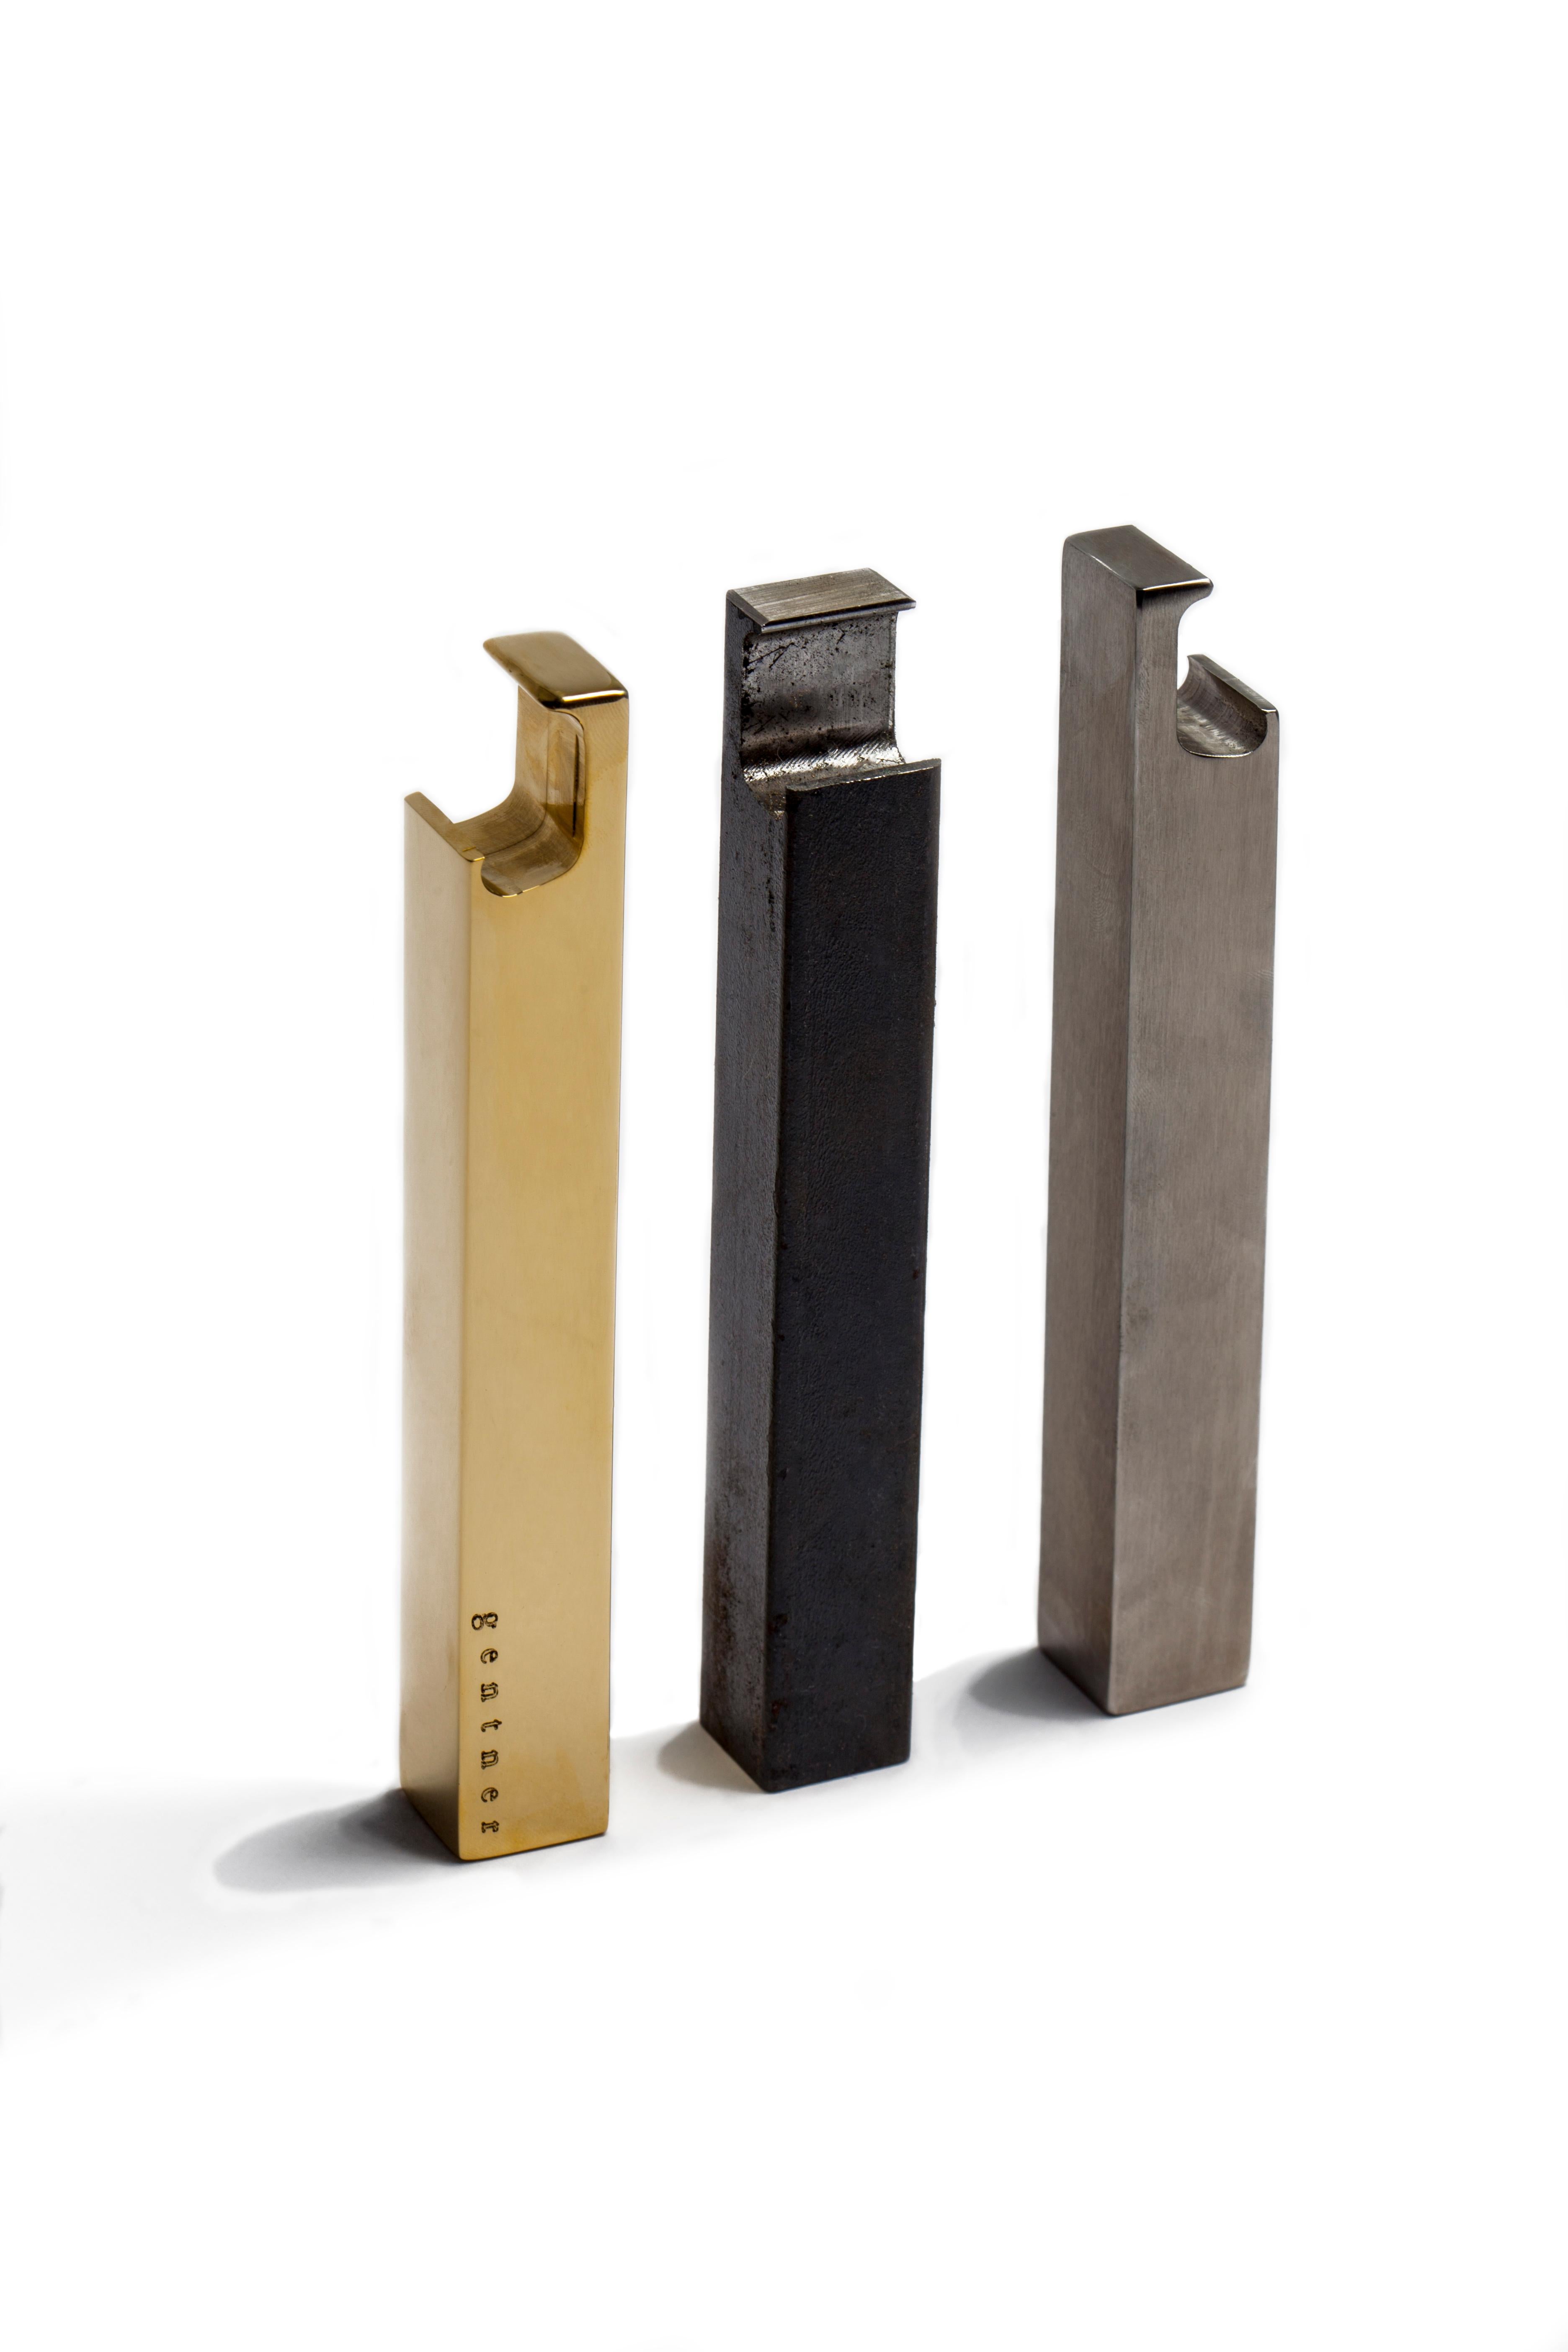 Darkned Brass Bottle Opener by Gentner Design
Dimensions: D 14 x W 1.9 x H 1.9 cm
Materials: darkned brass

Strong in form and heavy in weight, the bottle openers are elegant in their simplicity and precision. Solid bar stock is transformed